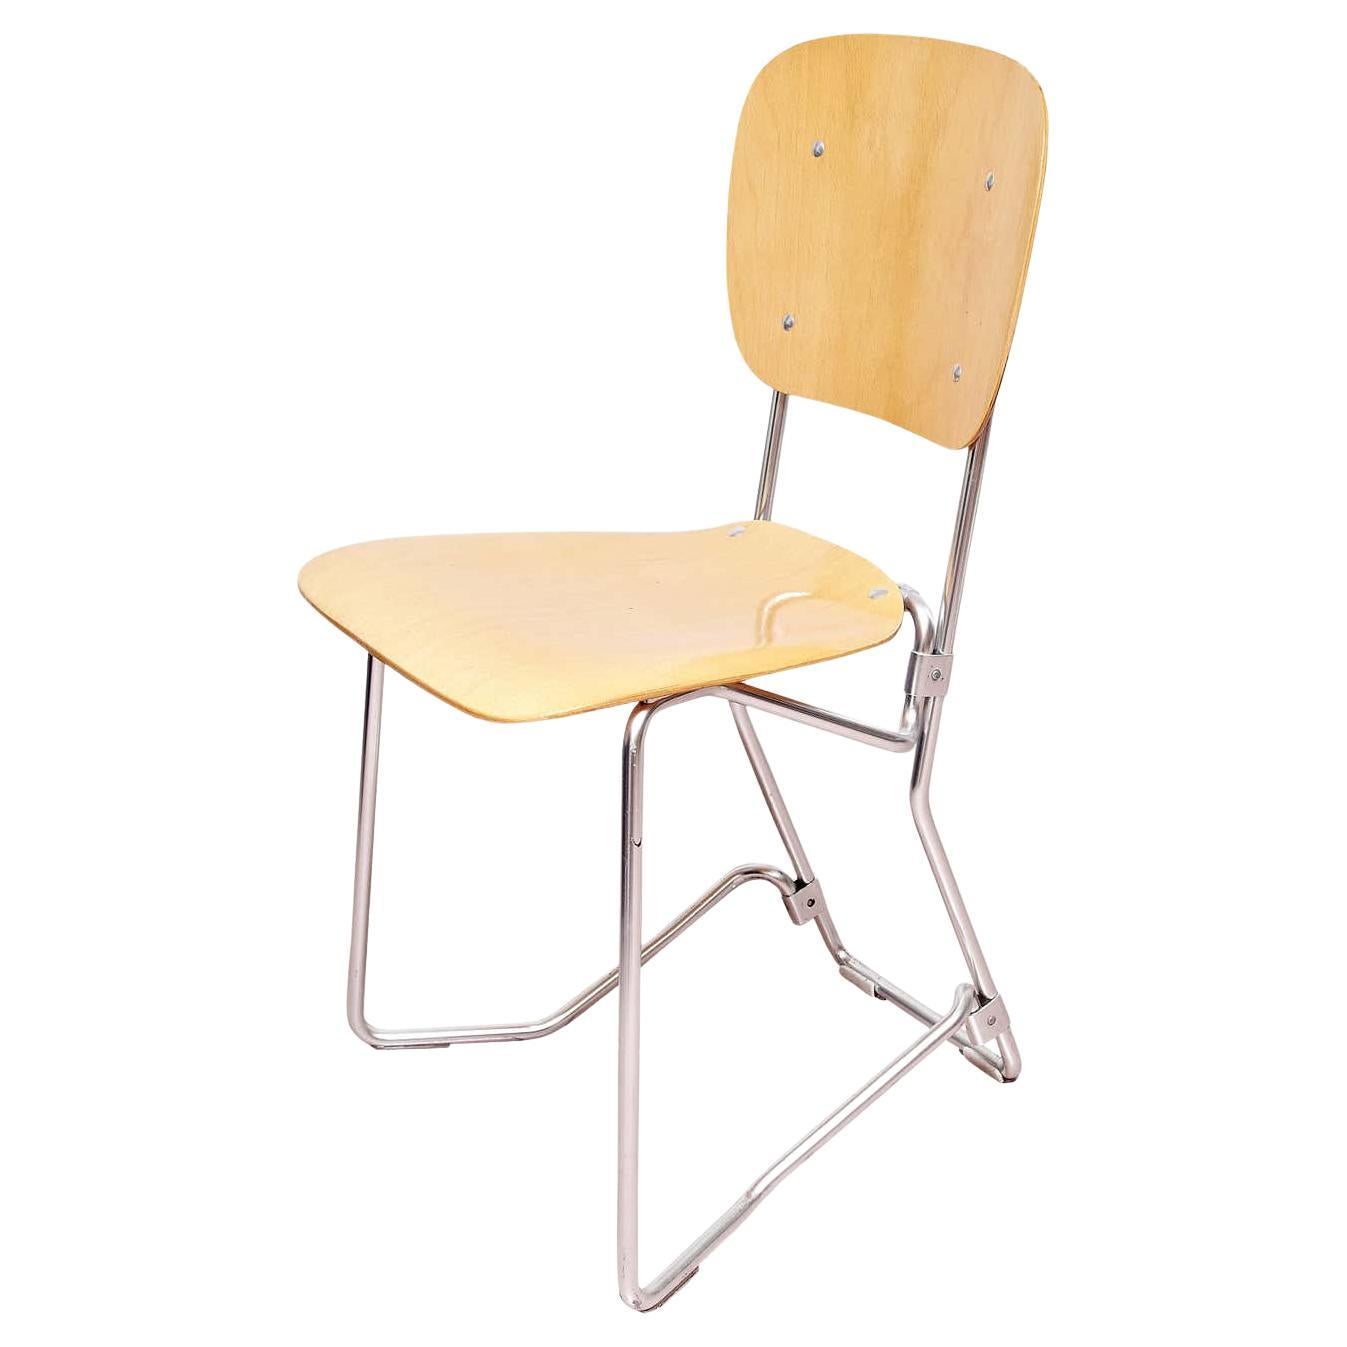 Armin Wirth Mid-Century Modern Metal and Wood Swiss Stackable Chairs for Aluflex